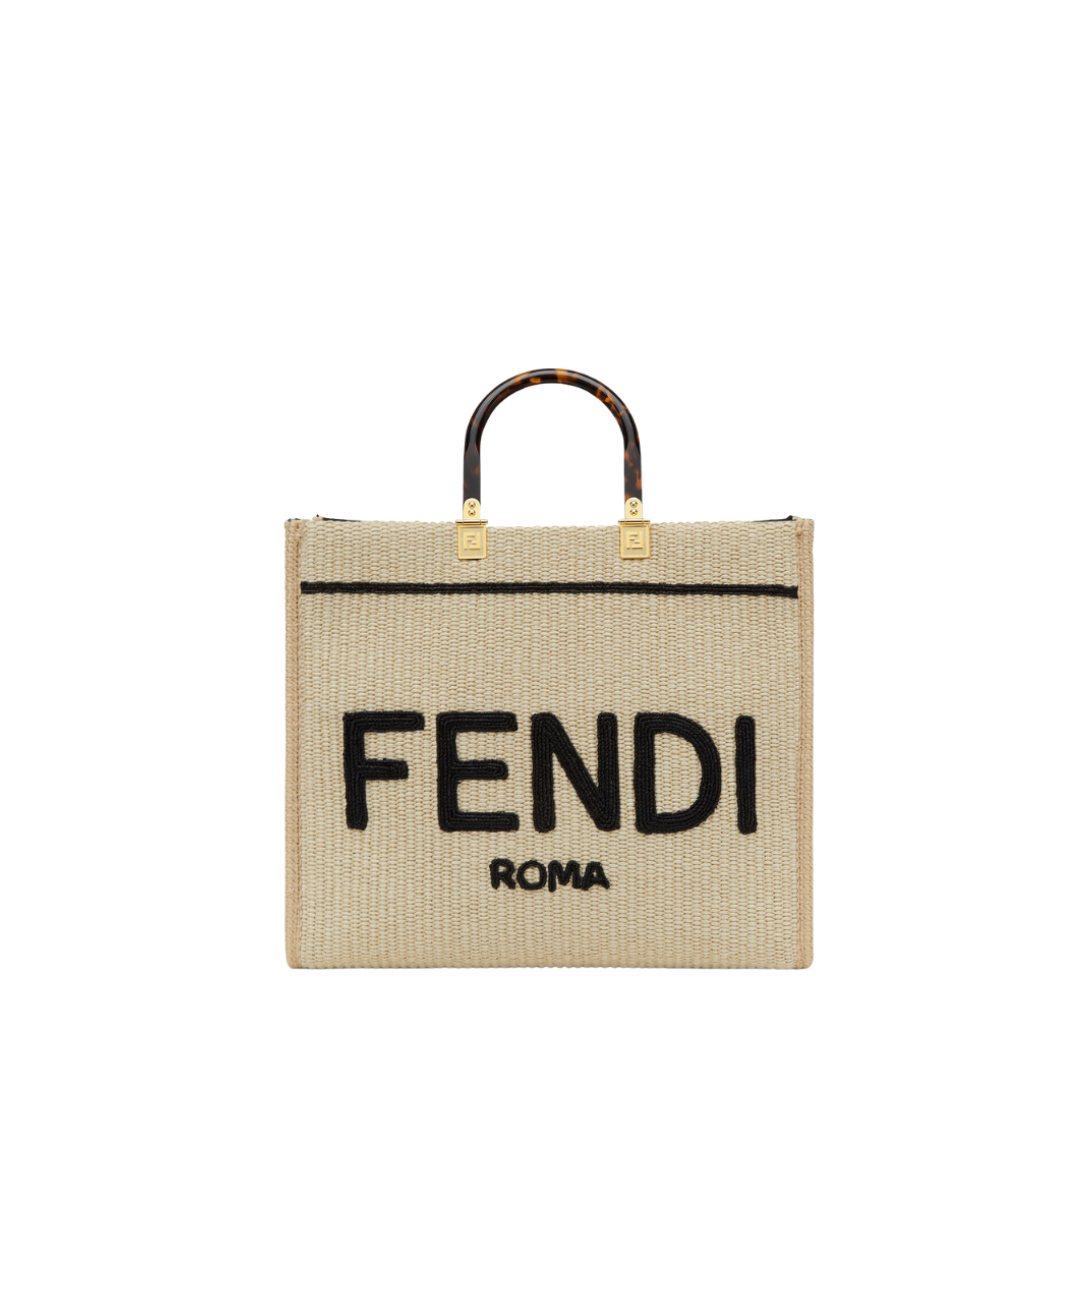 Image of a Fendi straw tote with a tortoise and gold handle. The bag says FENDI ROMA in large letters.